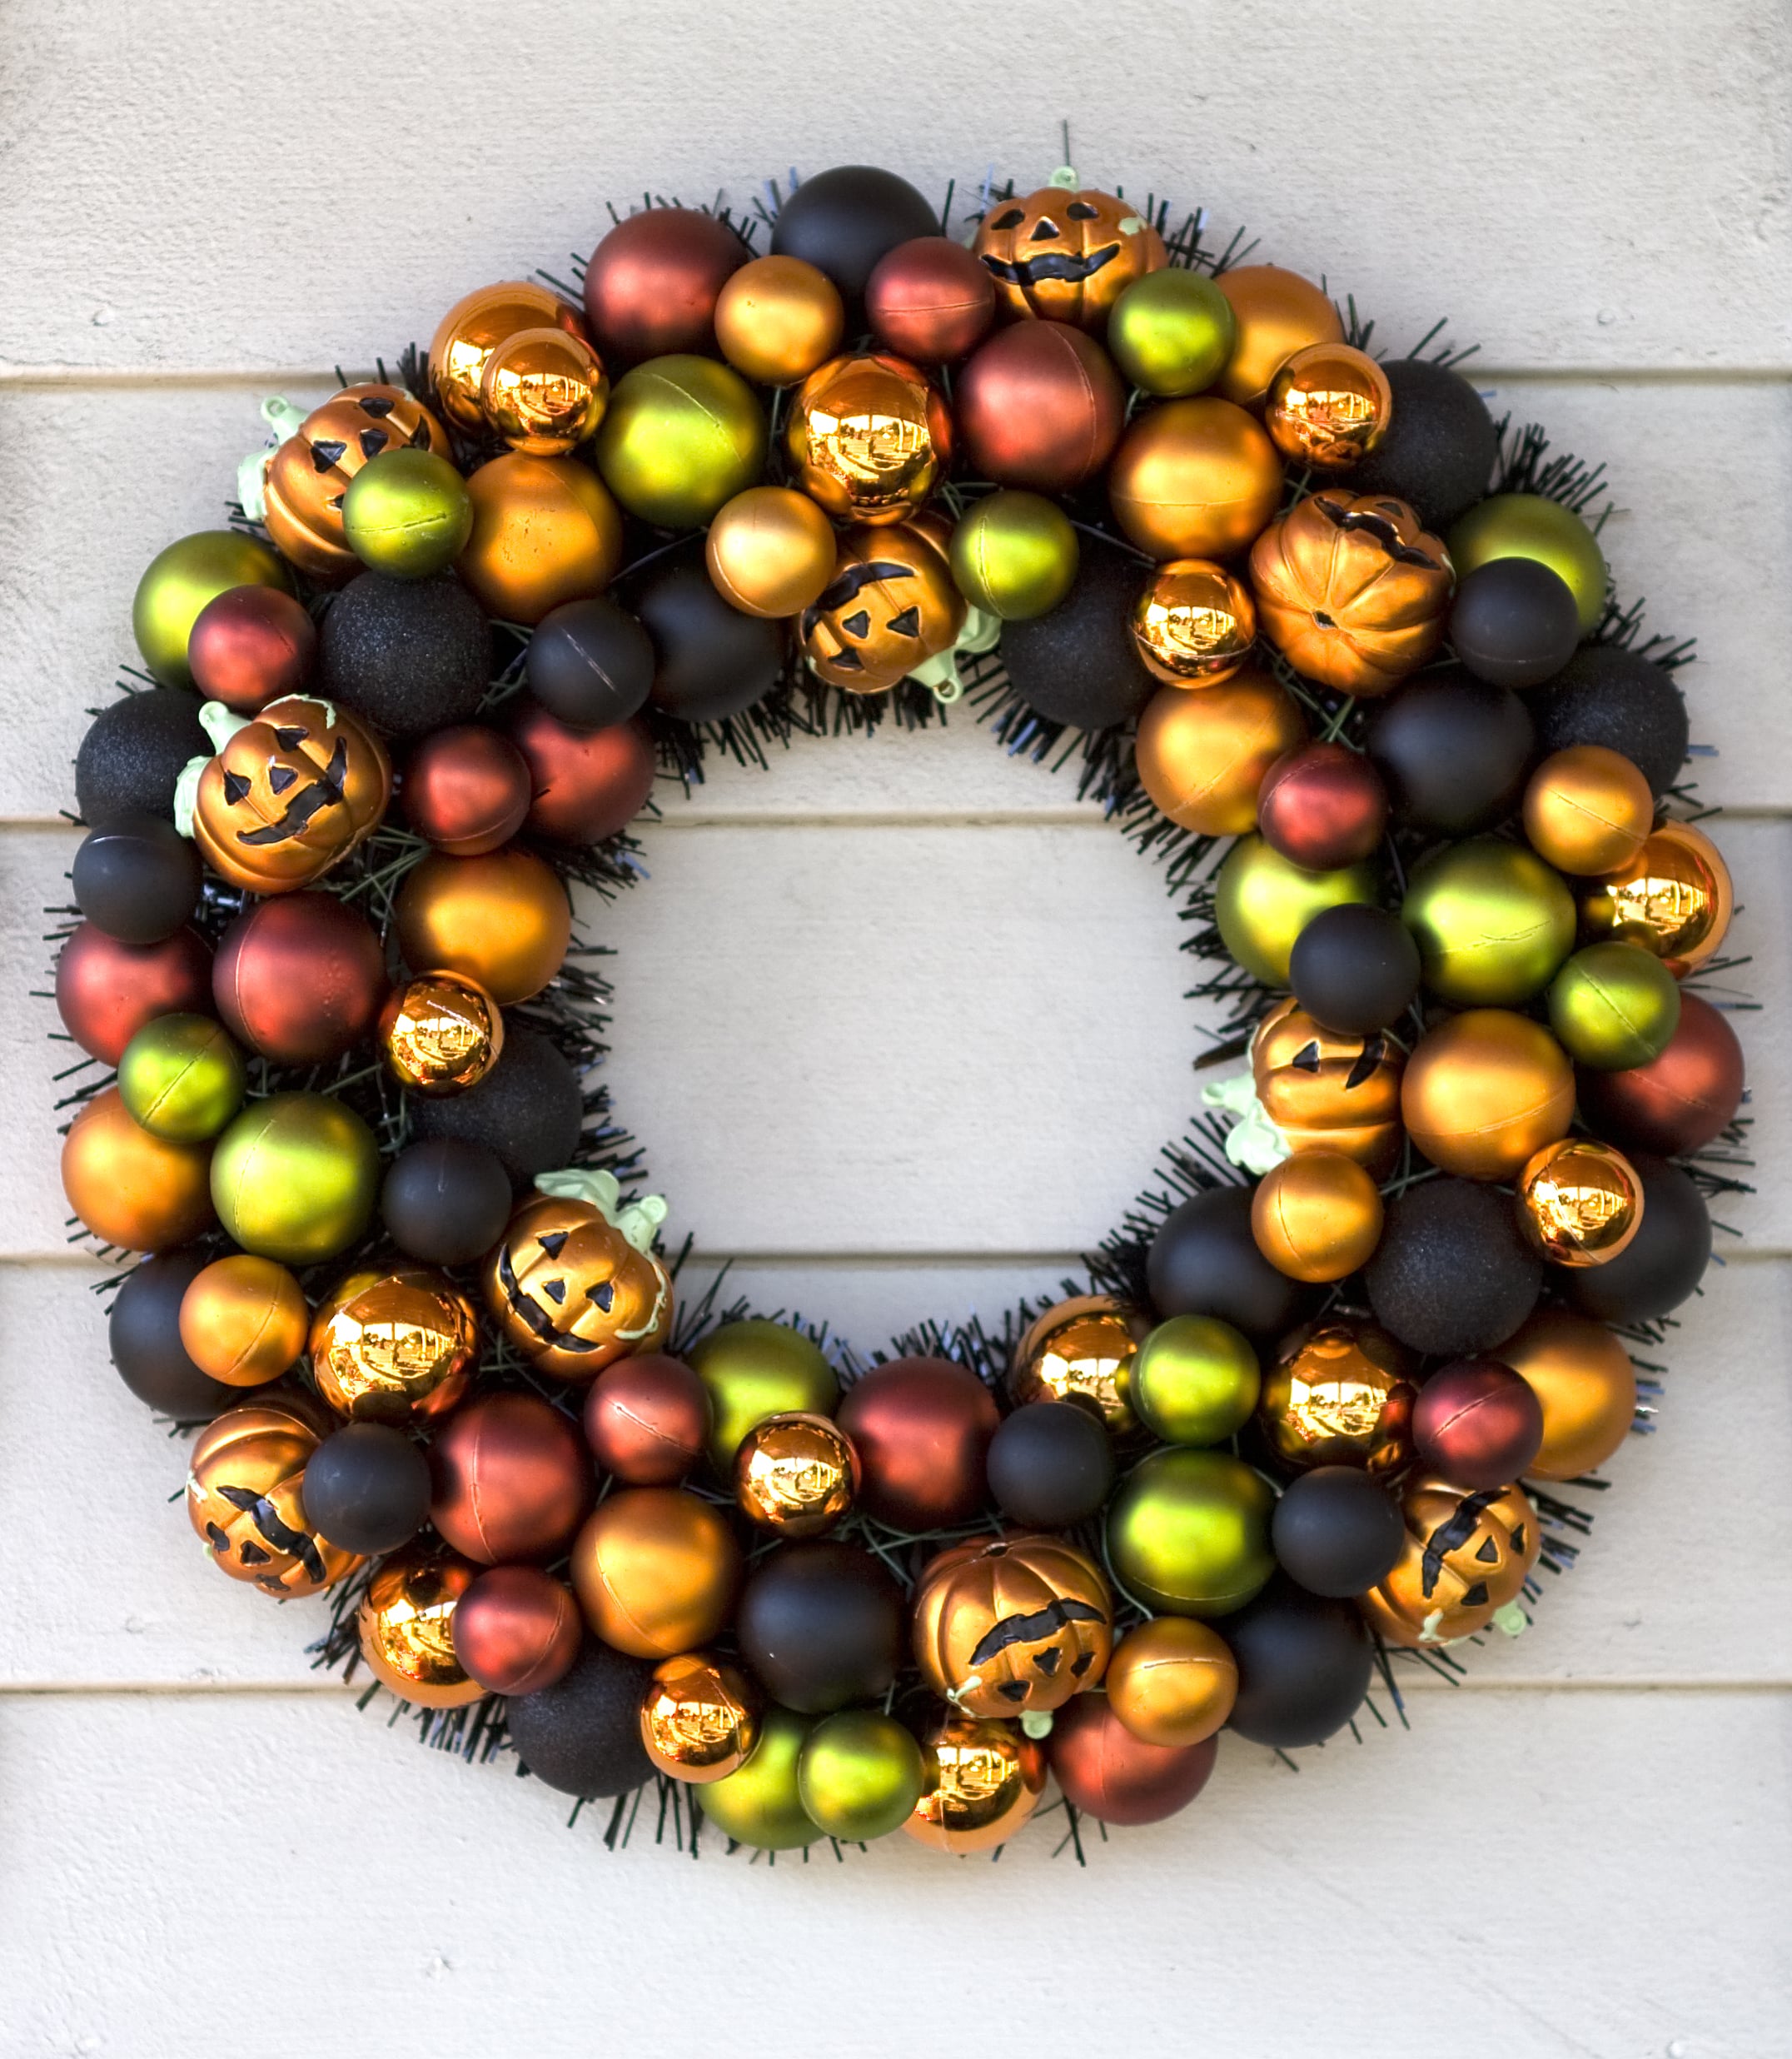 Halloween wreath made from baubles with pumpkins